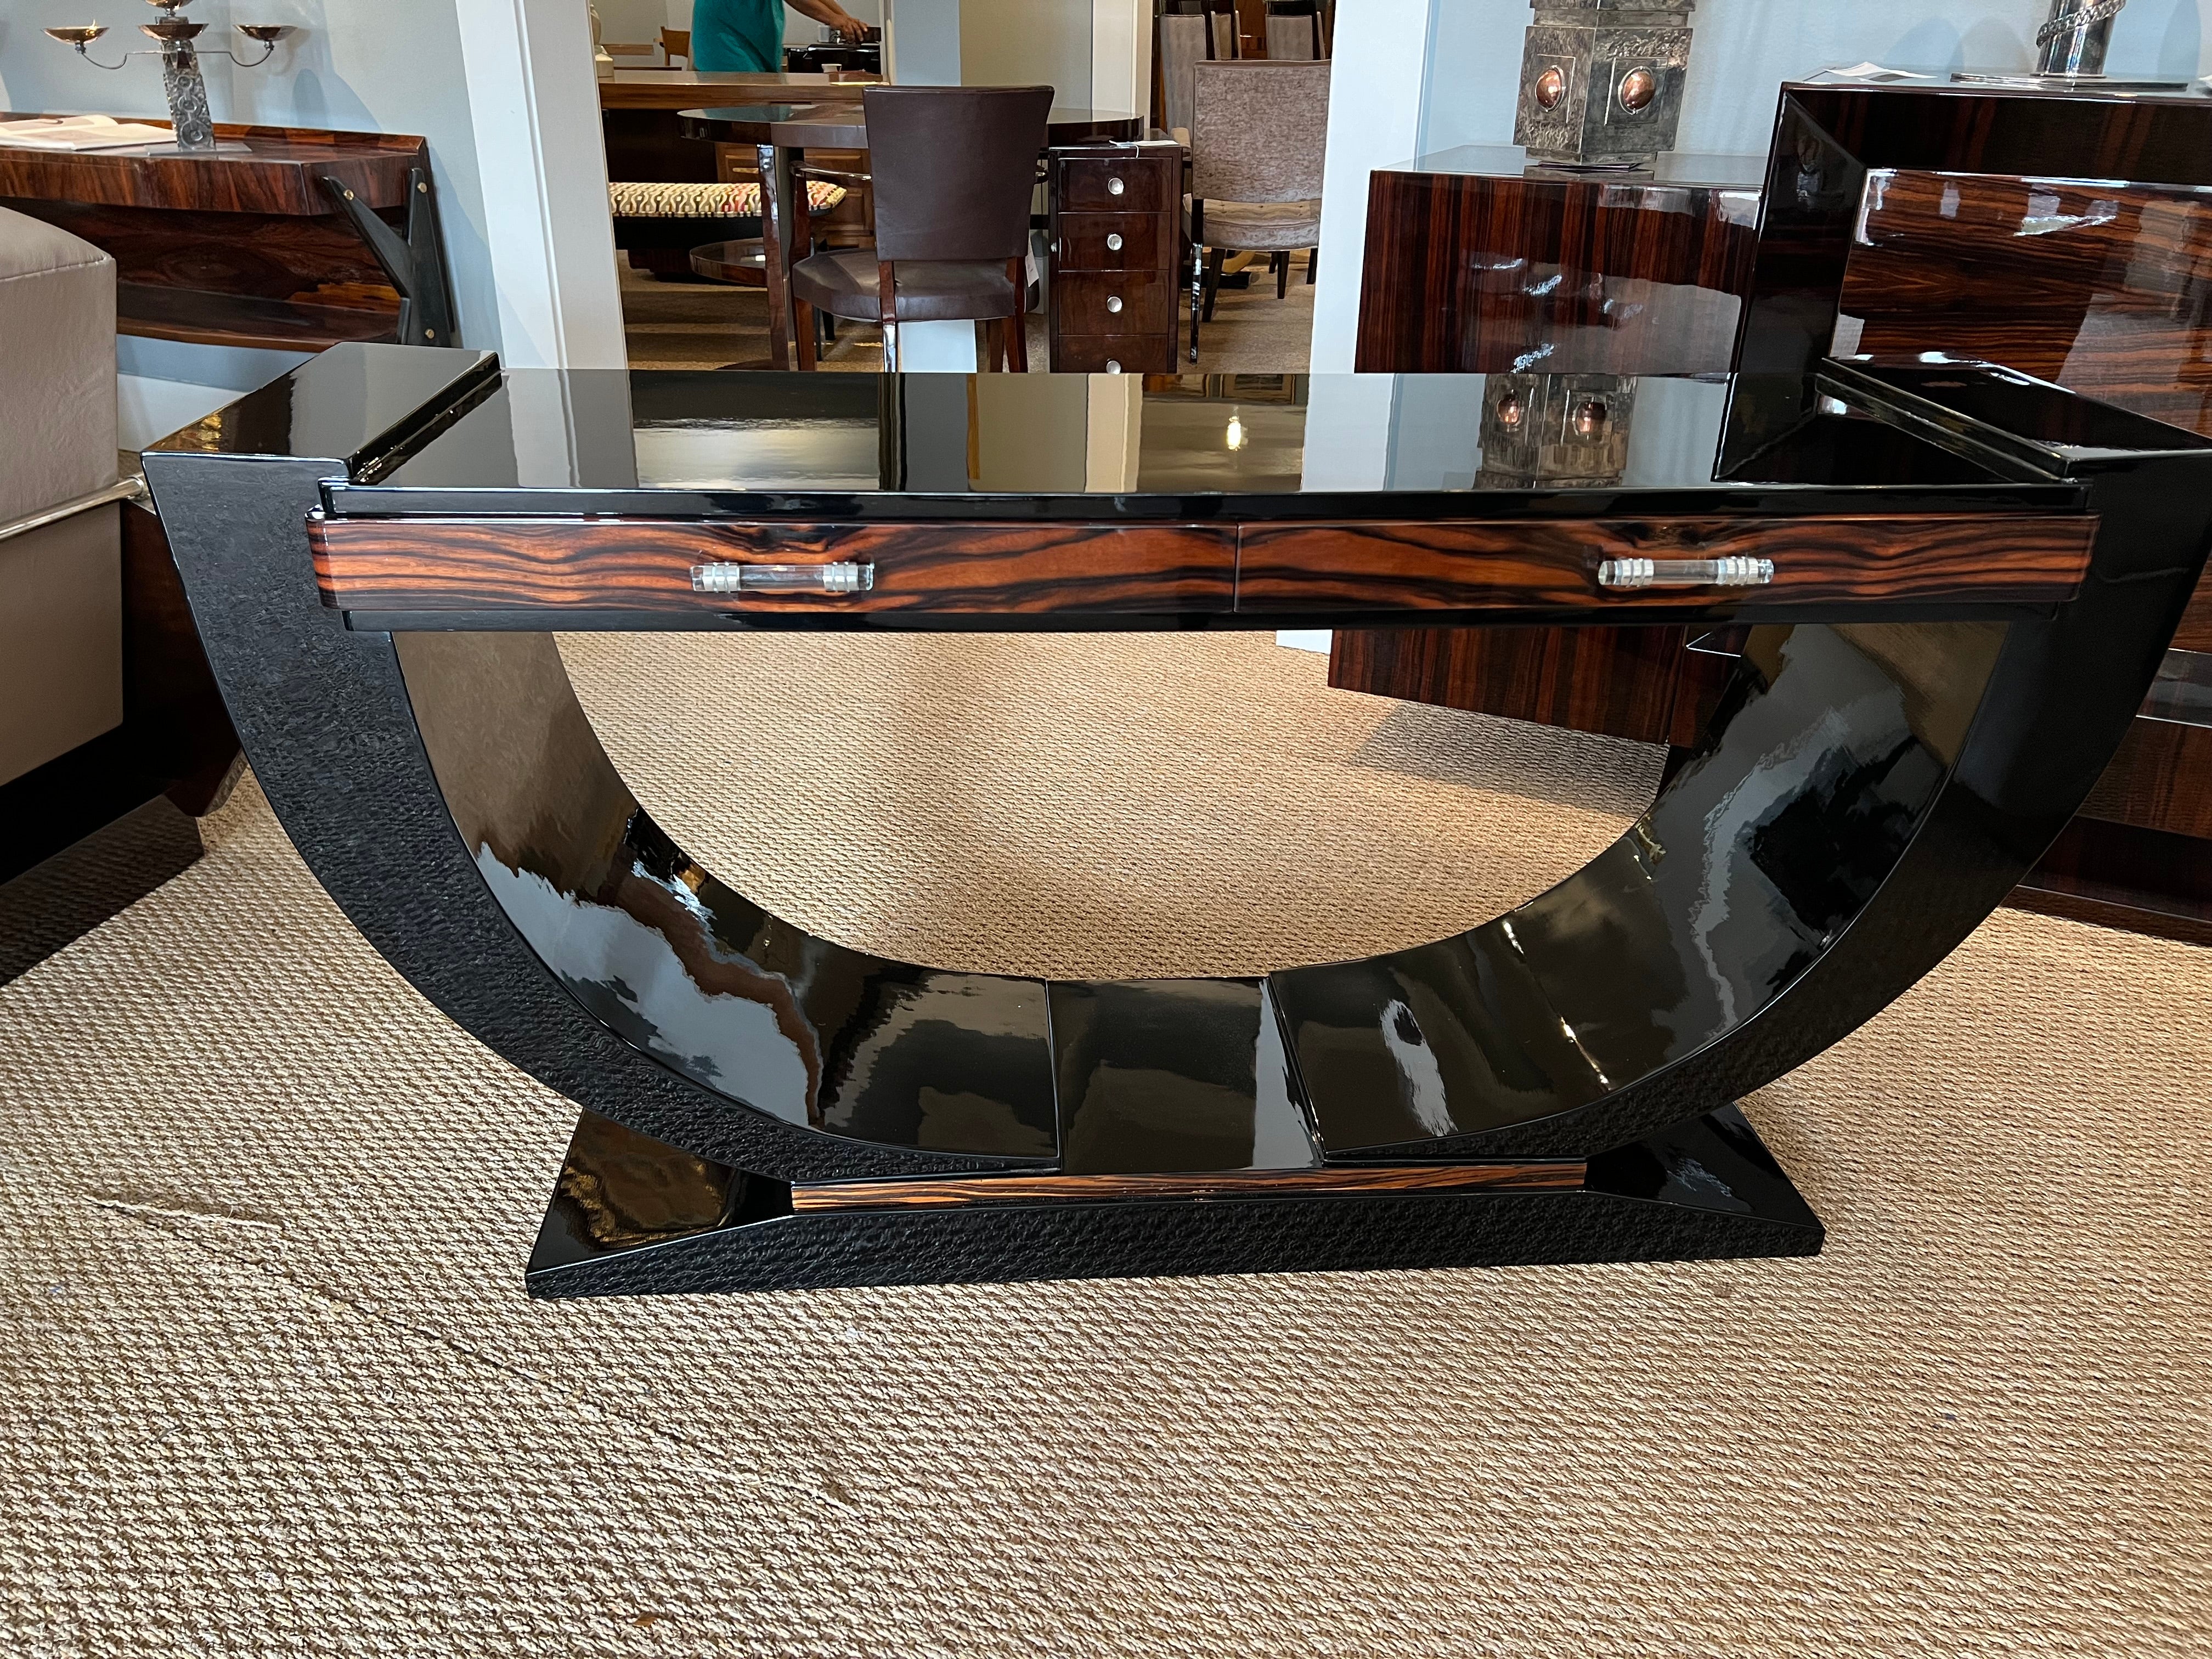 Gorgeous Art Deco French console made out Macassar wood and ebony. There is skillful juxtaposition between wood colors. Console top is supported by 2 semi-circular legs that are attached to the trapezoid prominent base. Top has 2 drawers with